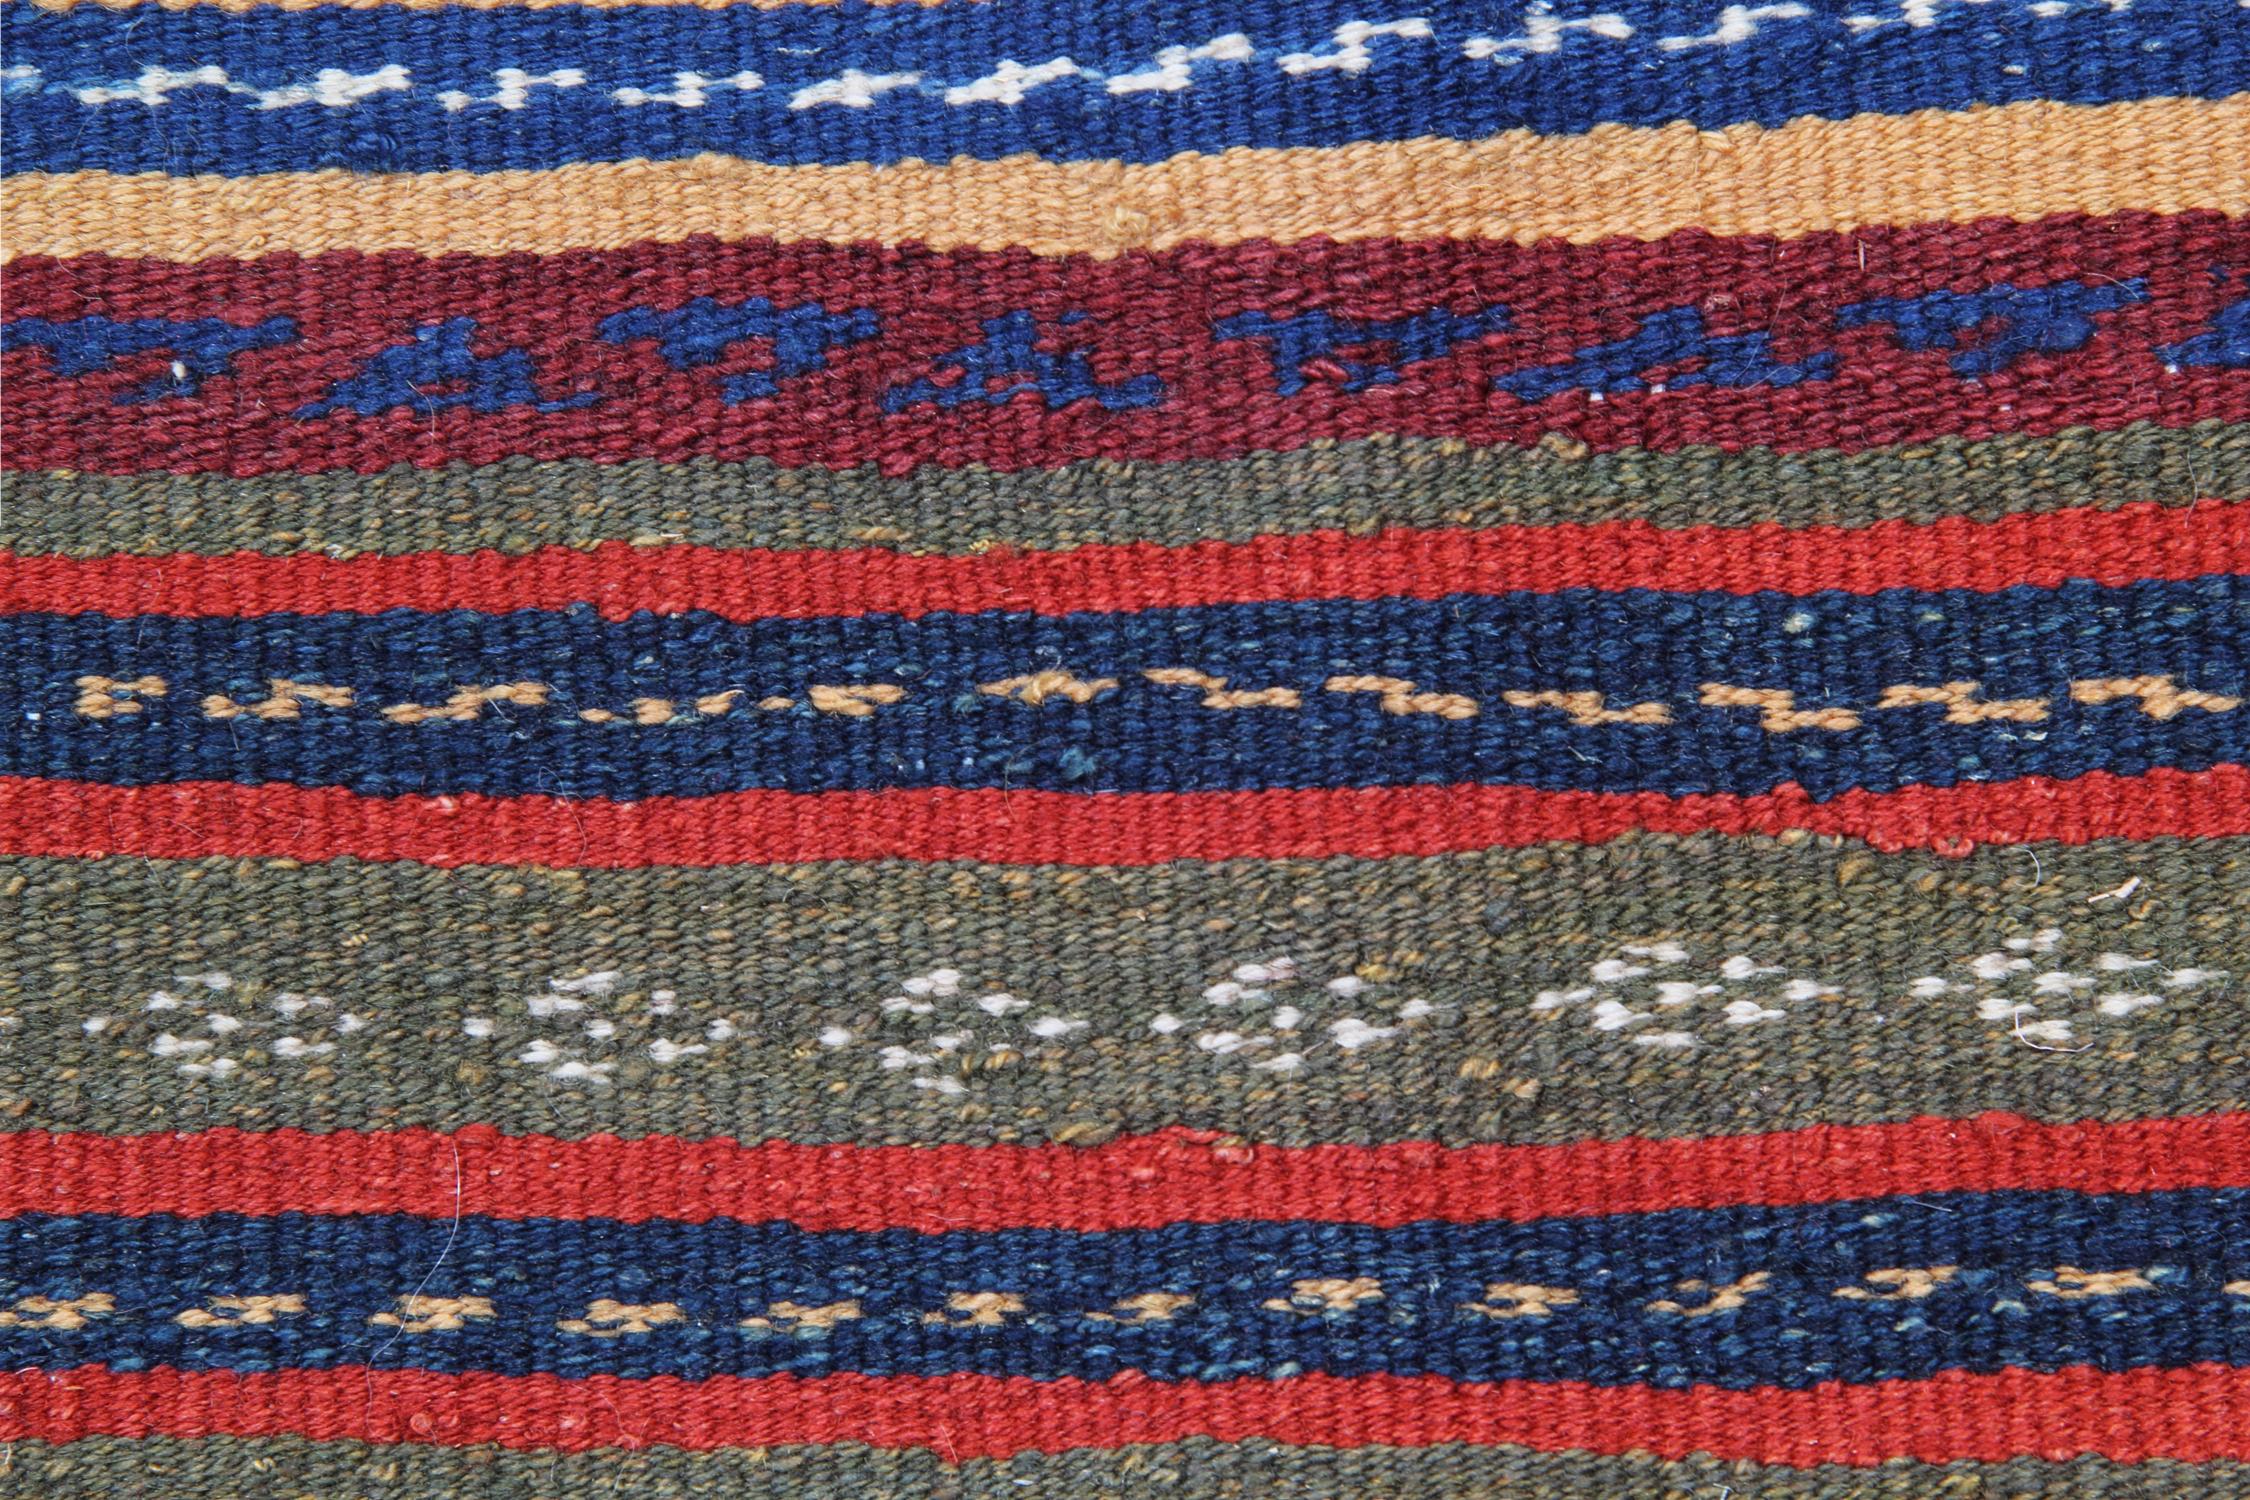 Sofreh Oriental Flatwoven Kilim Rug Traditional Vintage Minimal Rug -116x128cm In Excellent Condition For Sale In Hampshire, GB